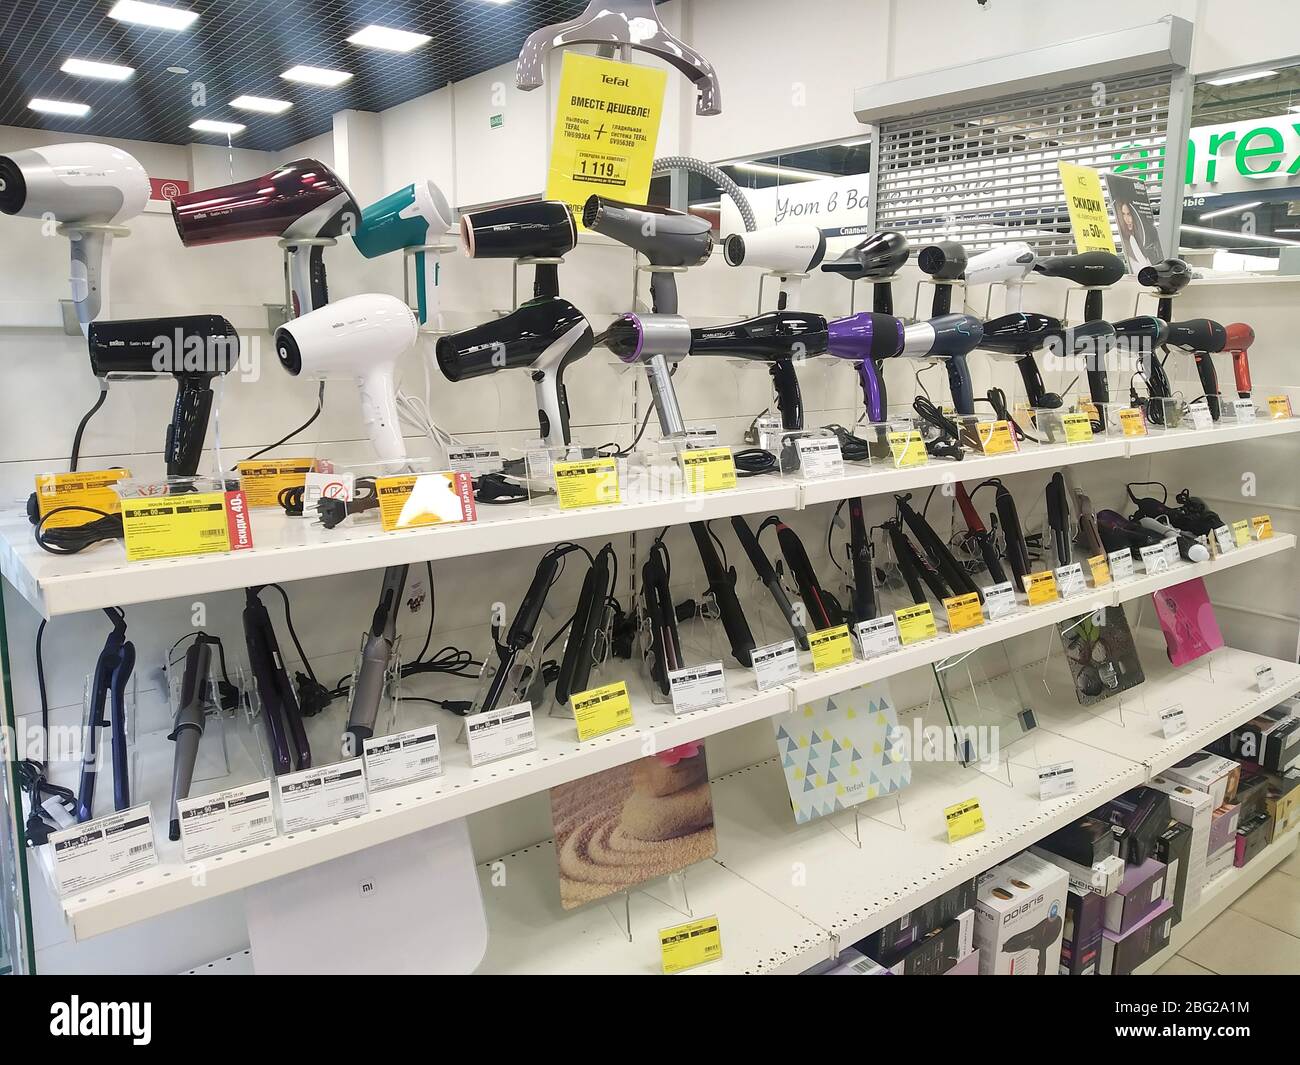 Bobruisk Belarus : Sale of hair dryers and irons for hair styling  in the store of household appliances and electronics, shopping Stock Photo  - Alamy